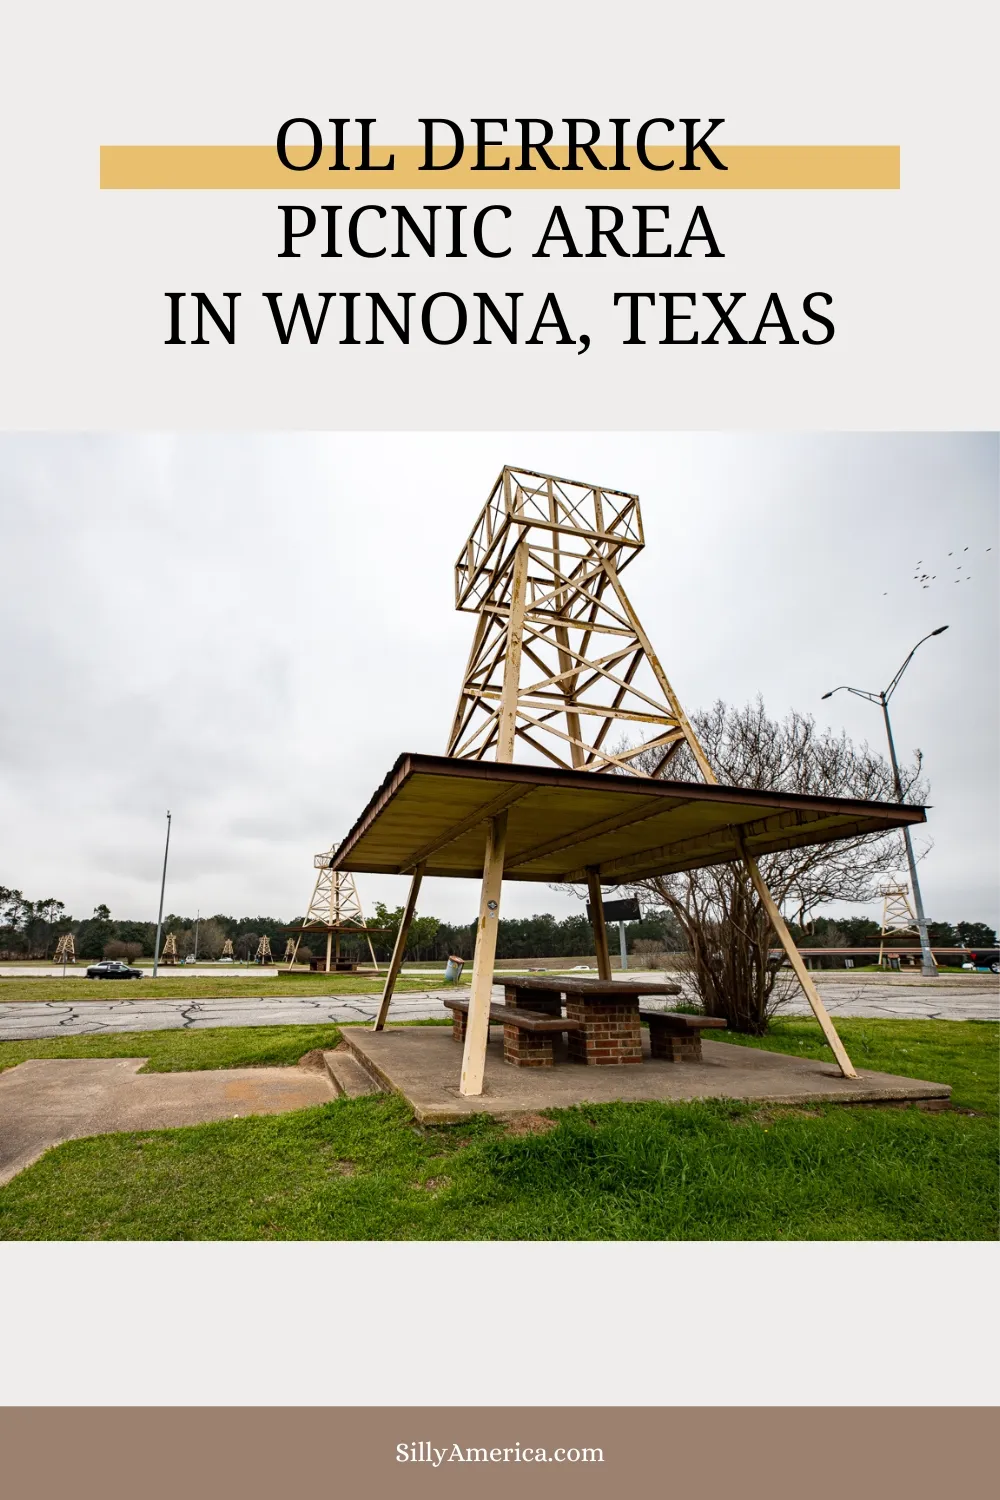 If you need a spot to stretch your legs on a Texas road trip or want to have your road trip sandwiches in a unique spot on the road, pull over at this roadside attraction, the Oil Derrick Picnic Area in Winona, Texas. #RoadTrip #RoadsideAttraction #RoadTrips #RoadsideAttractions #TexasRoadTrip #TexasRoadsideAttraction